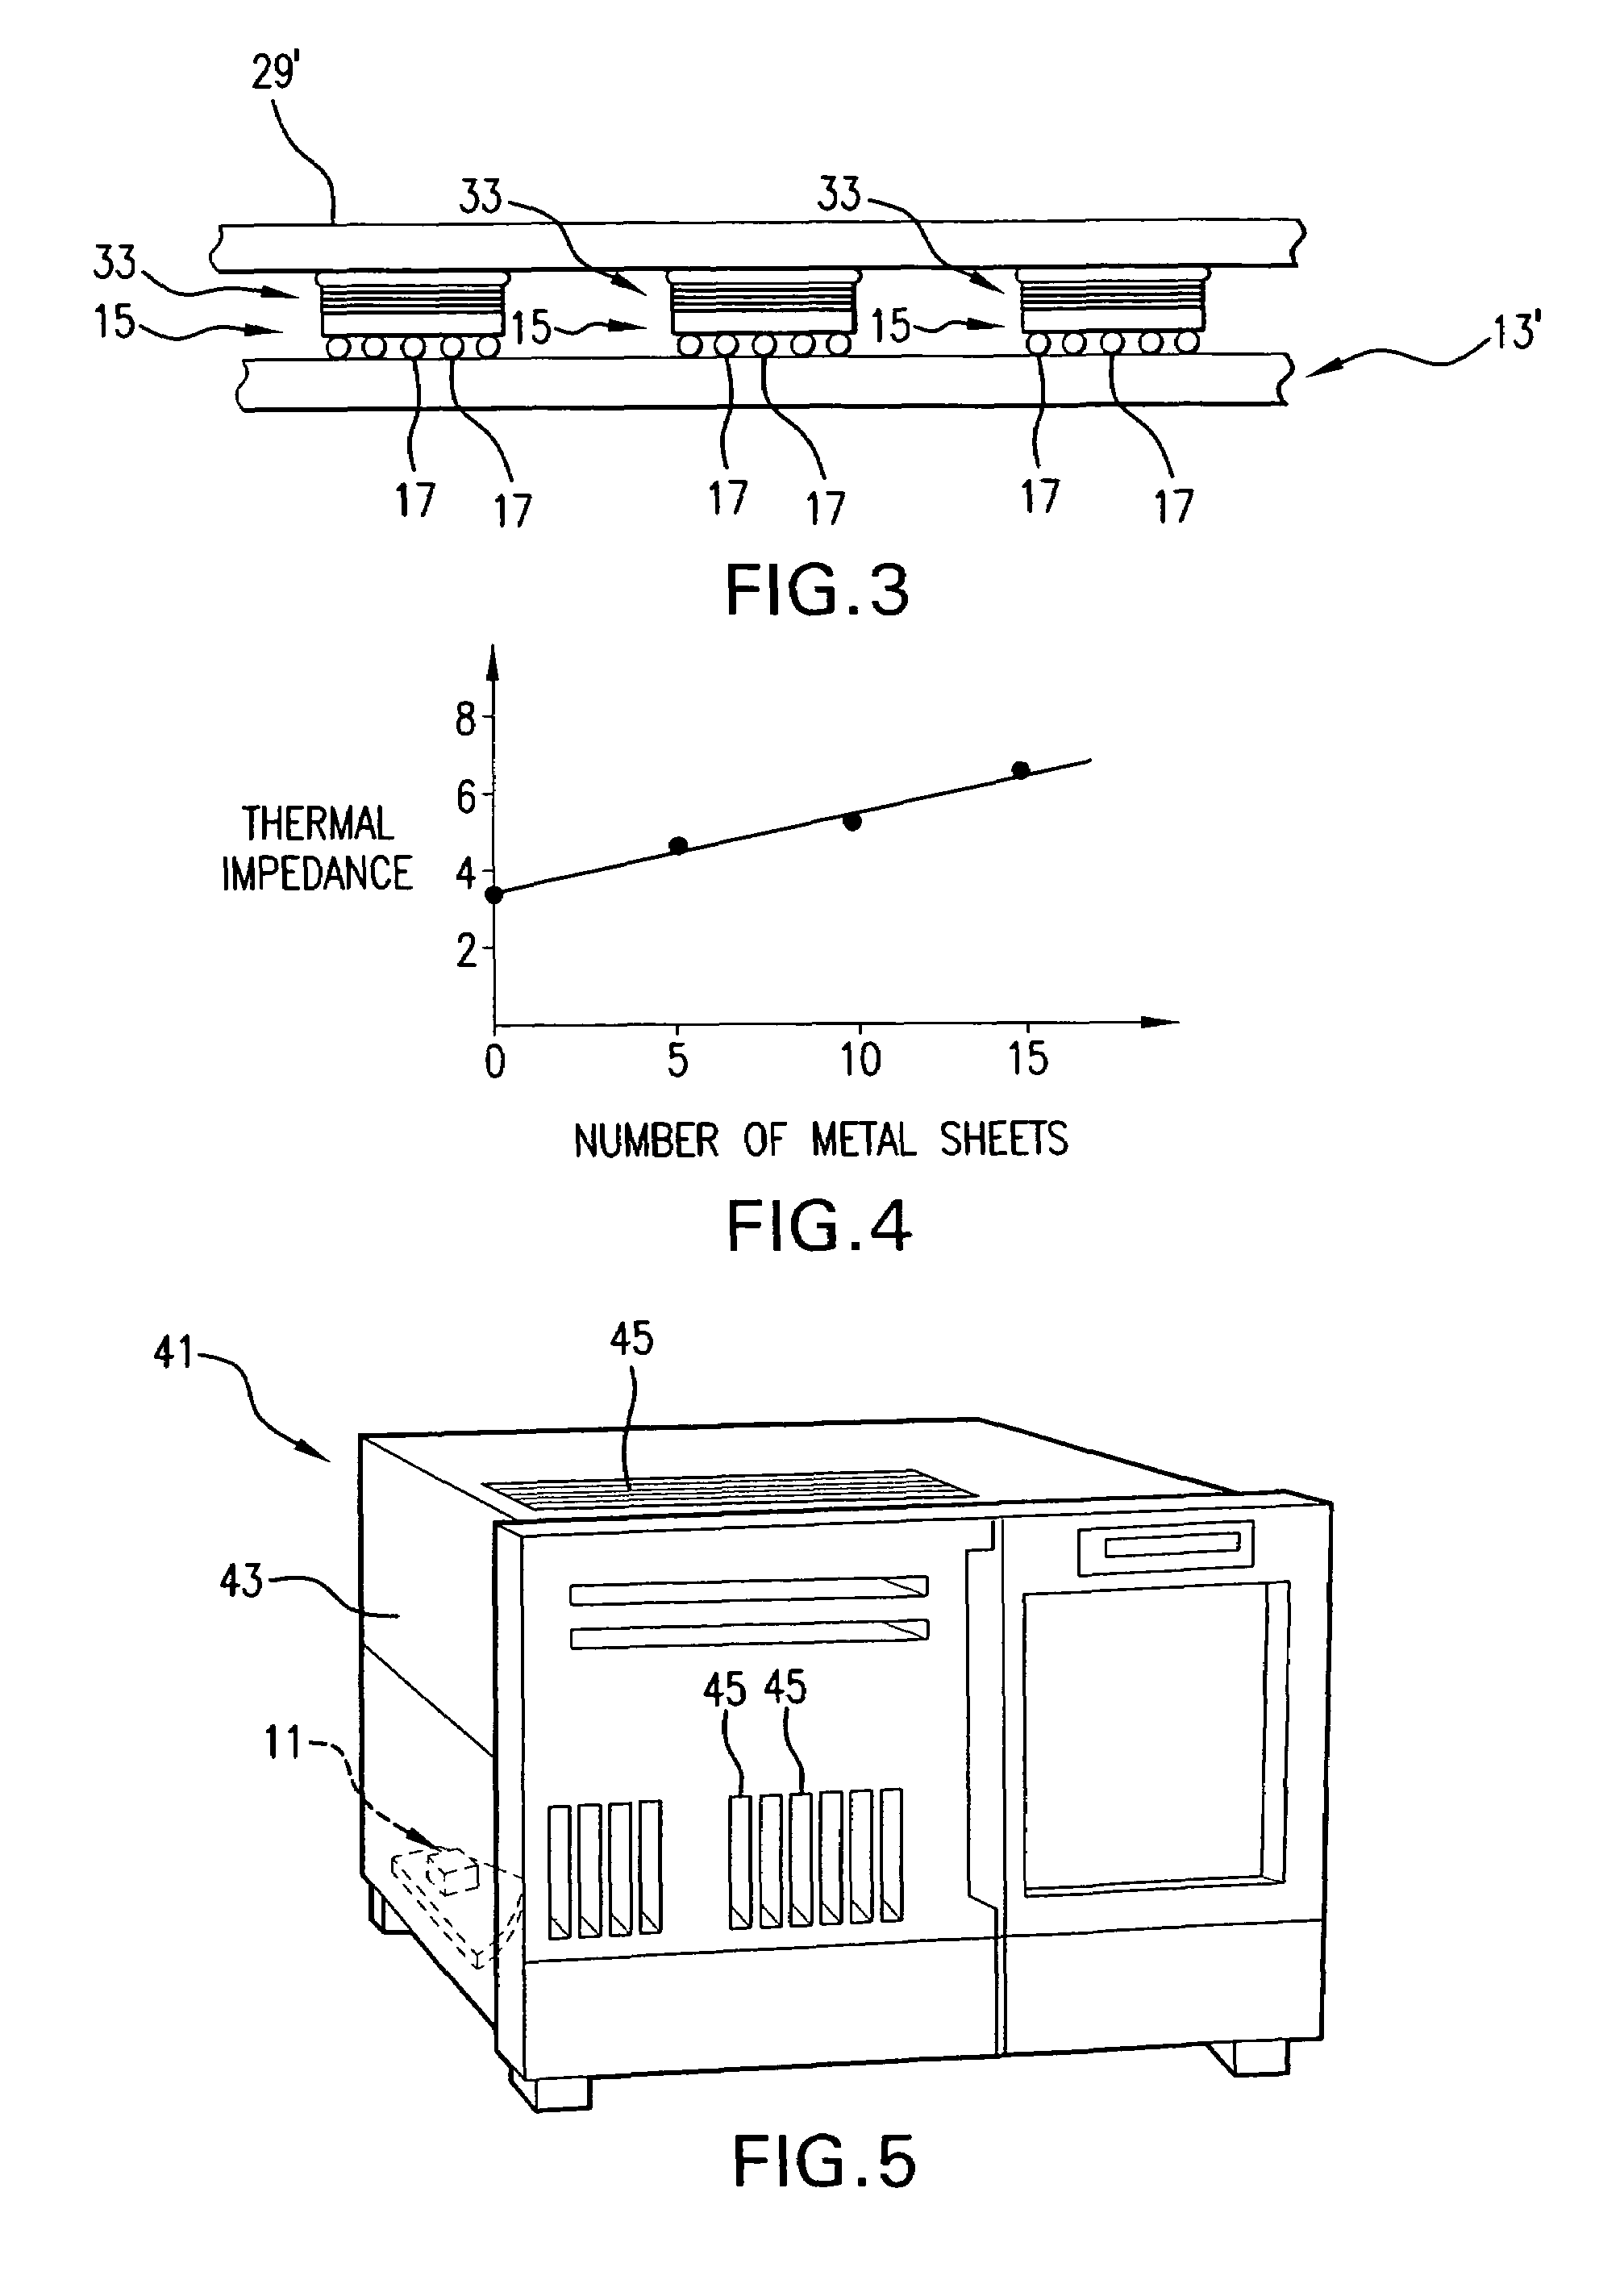 Adjustable thickness thermal interposer and electronic package utilizing same